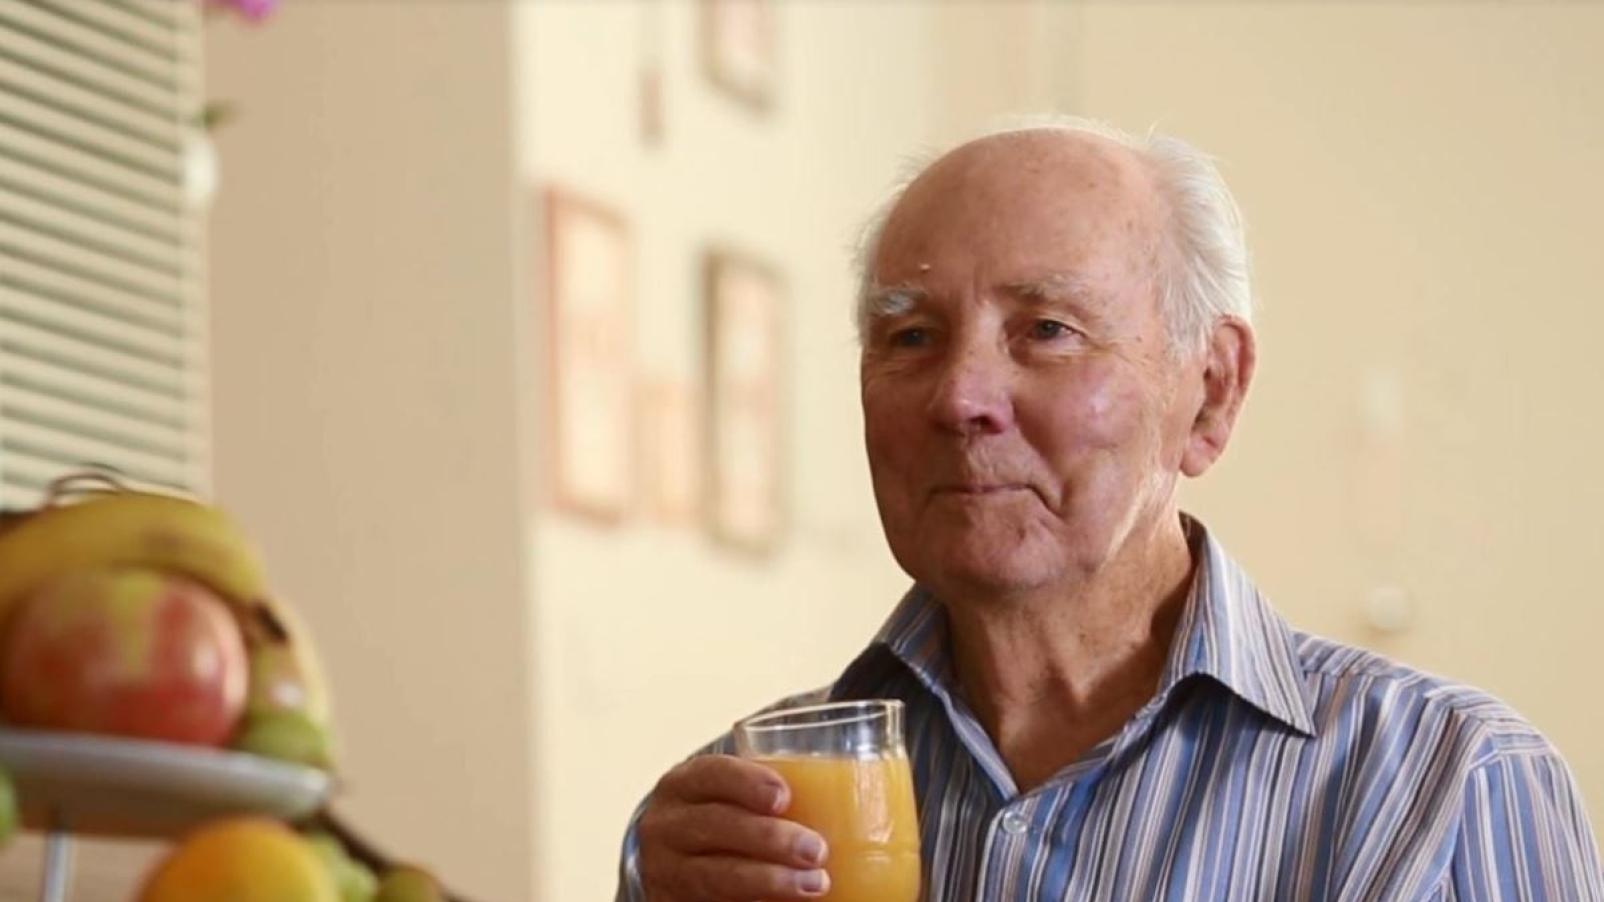 A man sitting at the breakfast table holding a glass of orange juice in his pyjamas